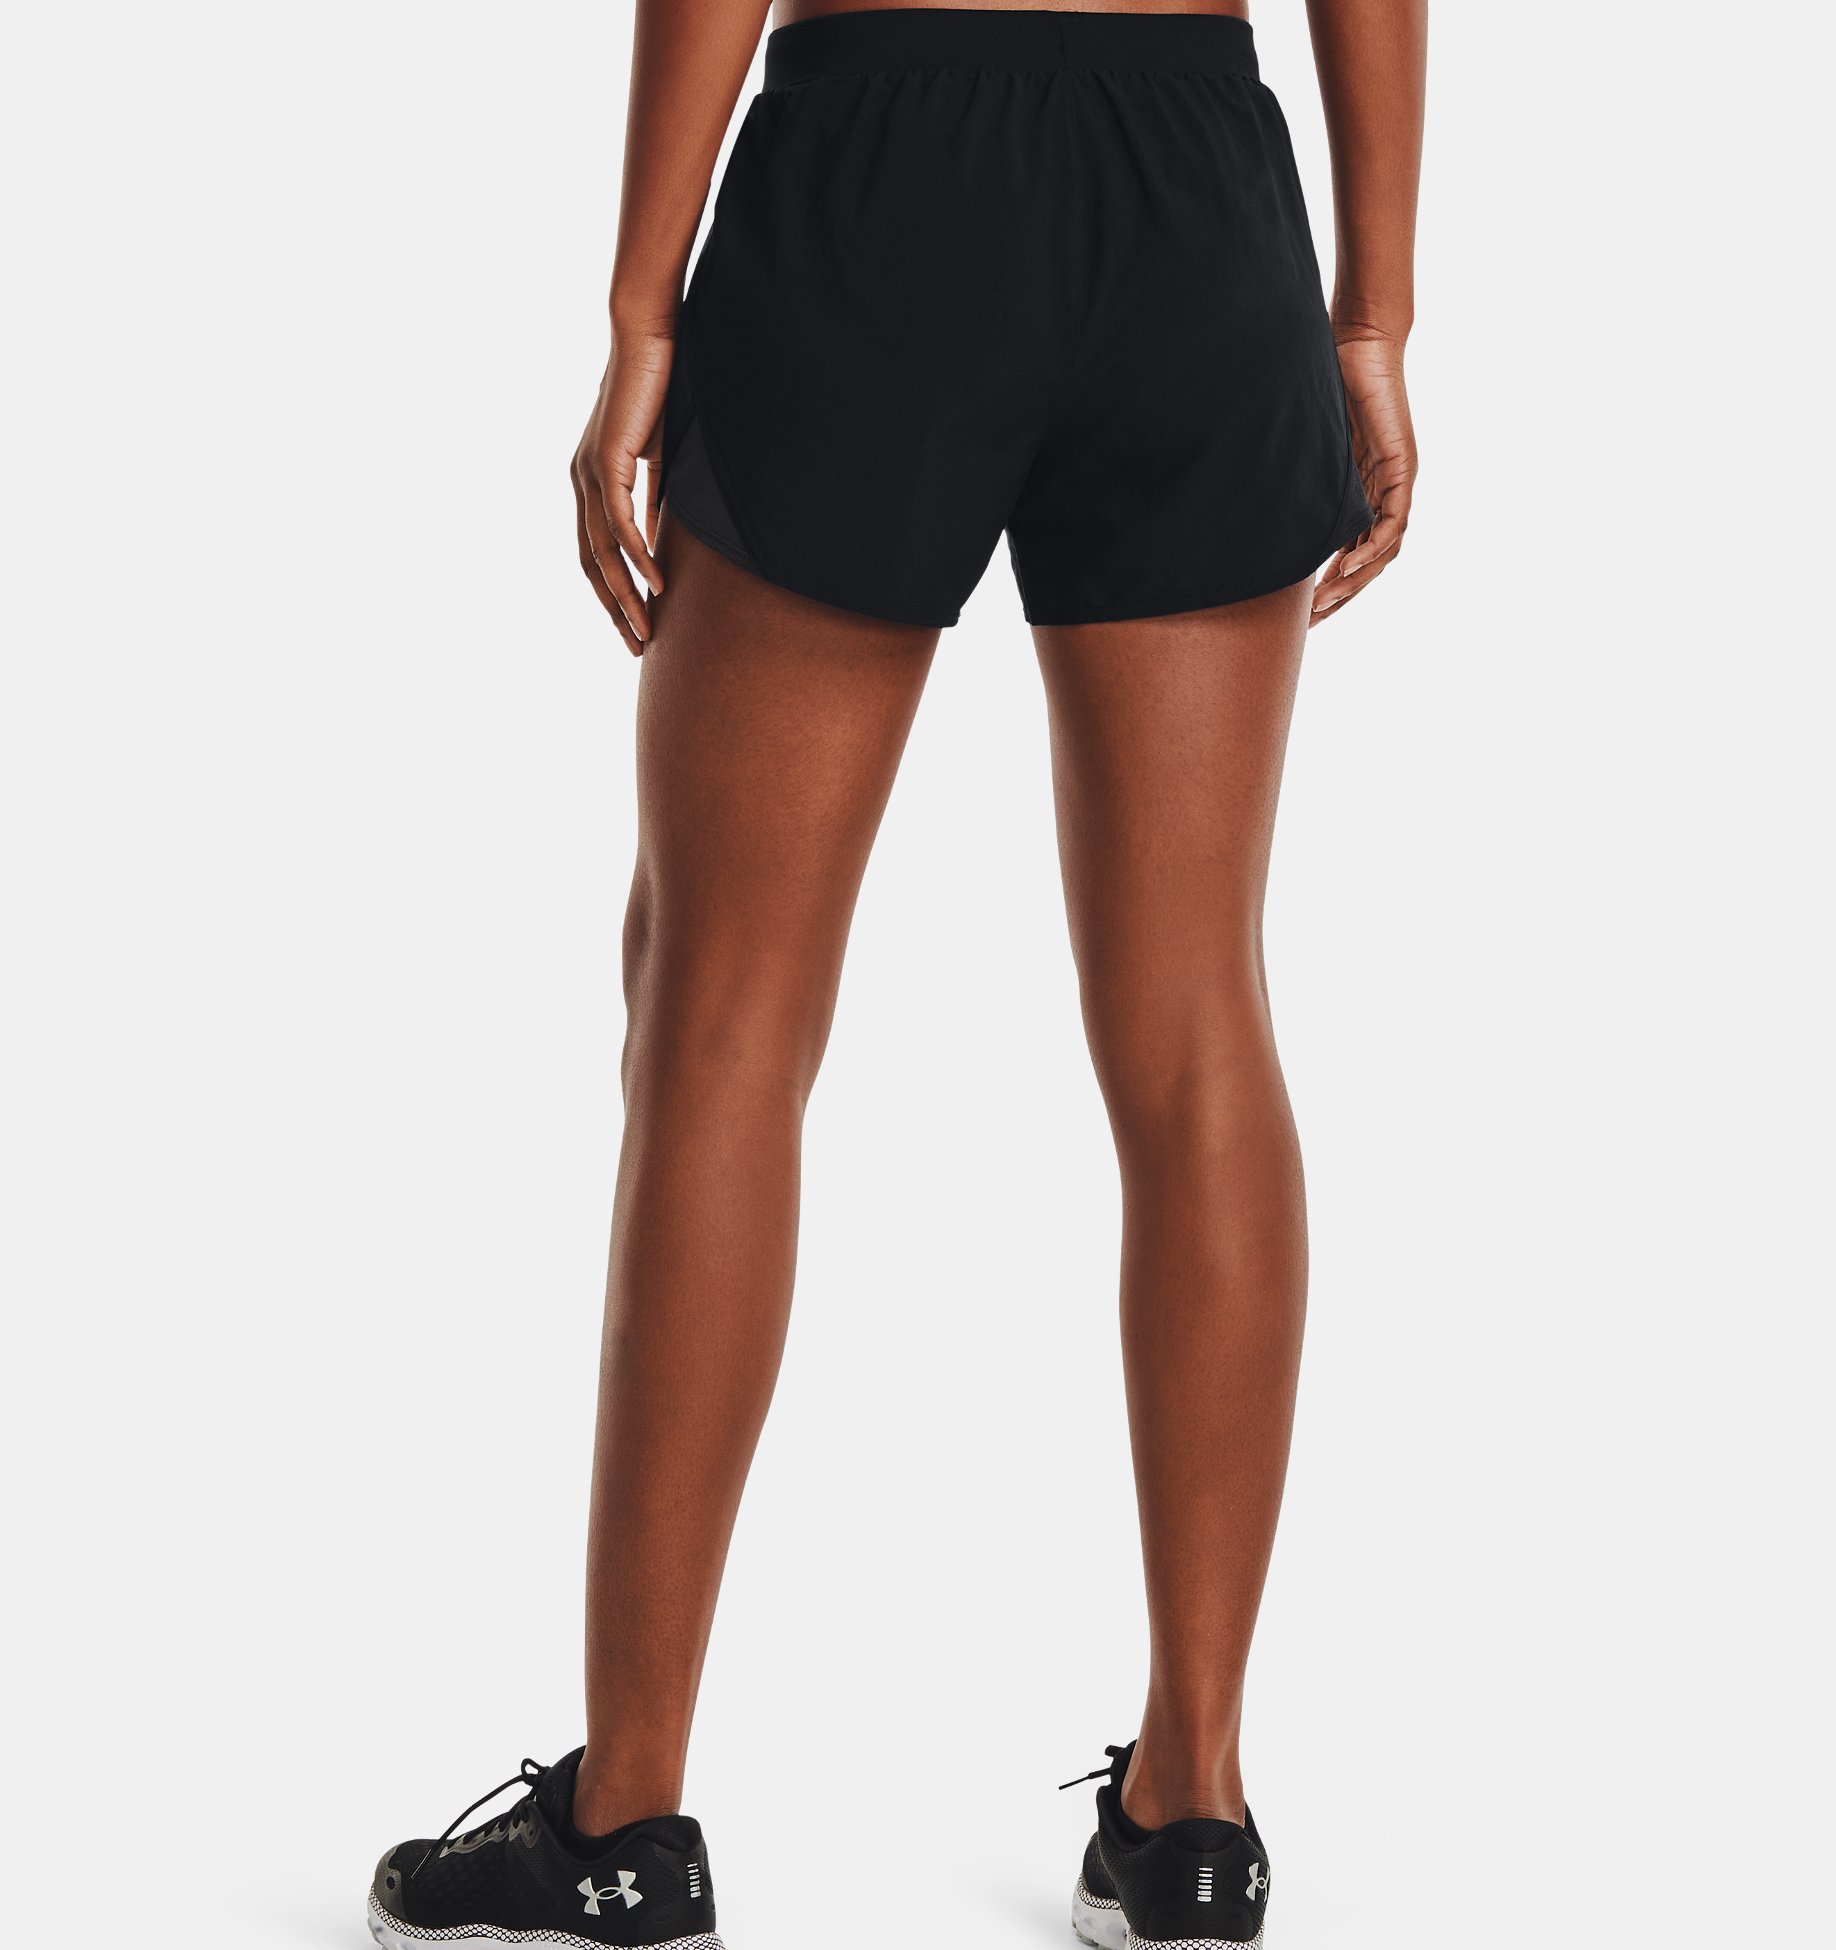 Under Armour Fly by 2.0 Printed Running Short Short Femme Short de Course Fly by 2.0 imprimé 